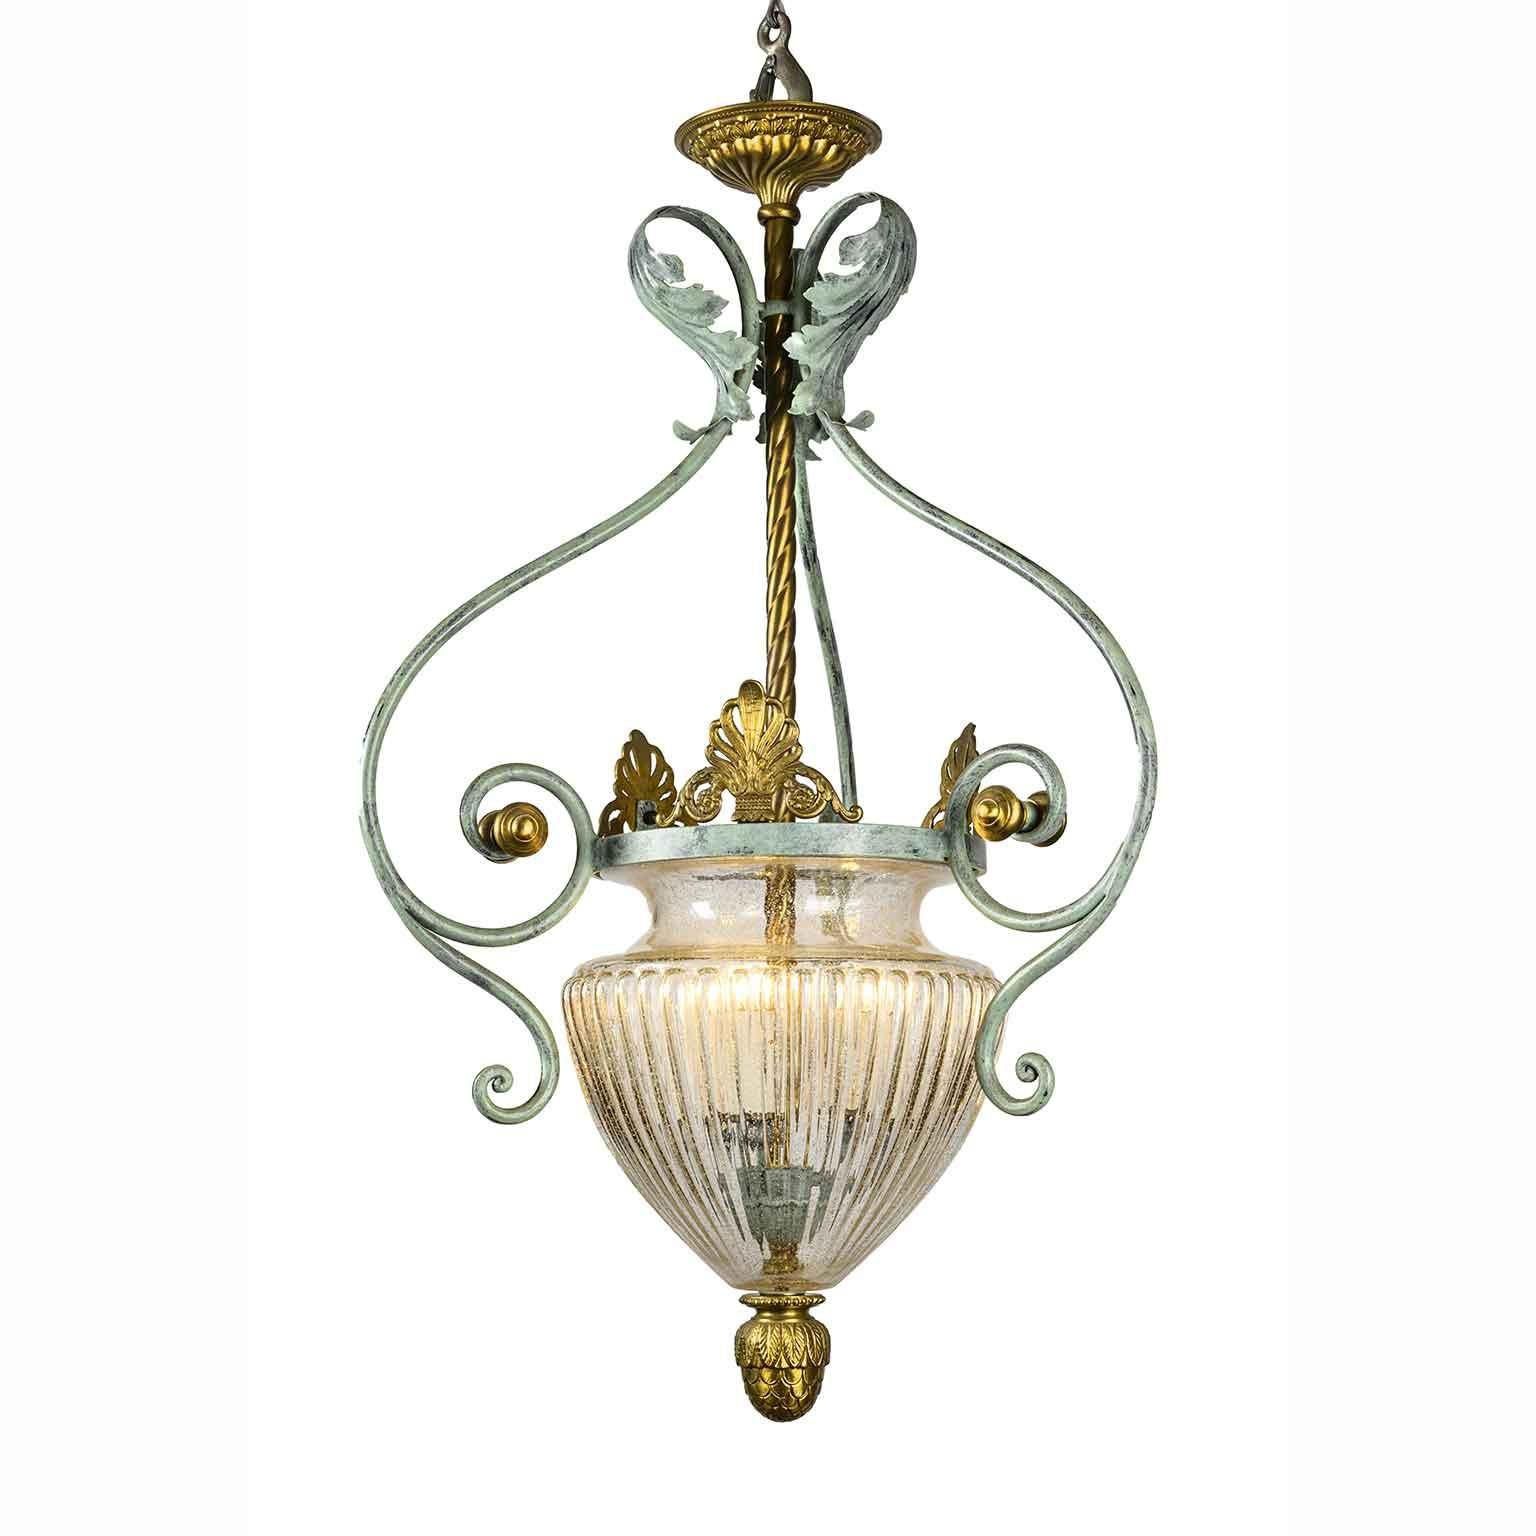 Empire Italian Florentine Hall Glass Chandelier by Banci Gilt and Green Wrought Iron For Sale